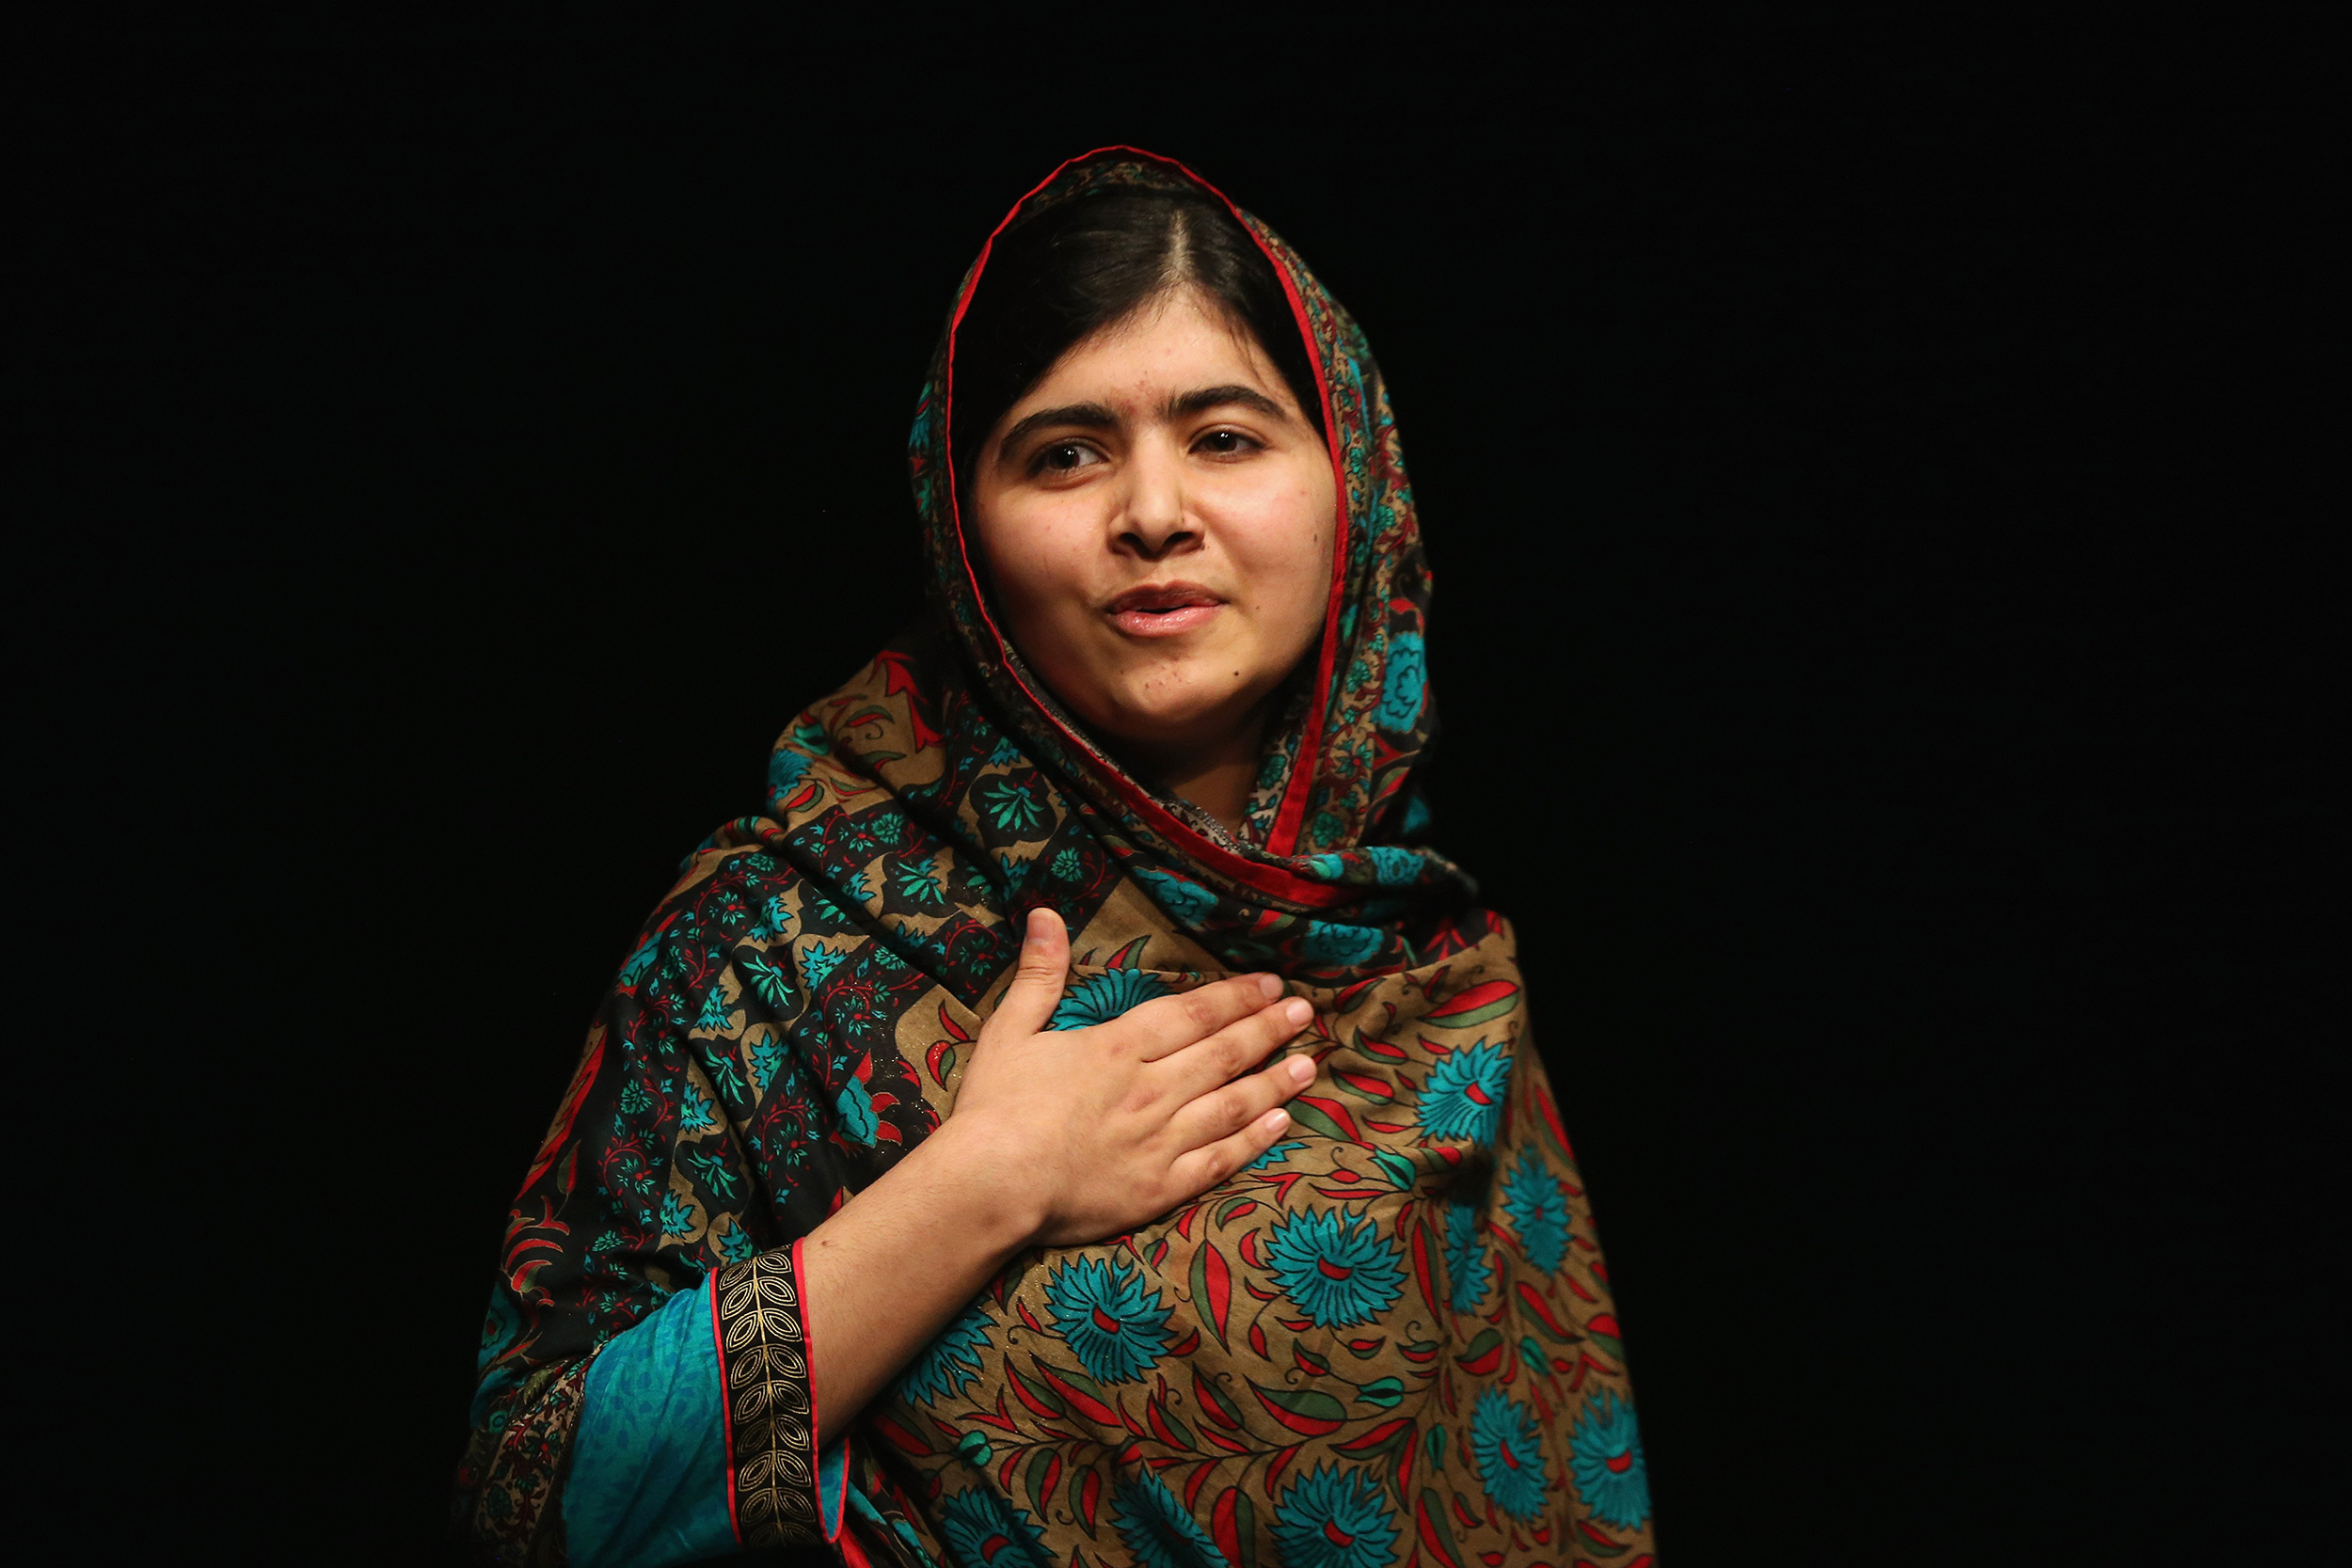 Malala Yousafzai grateful to Qatar government for help in Afghan evacuations